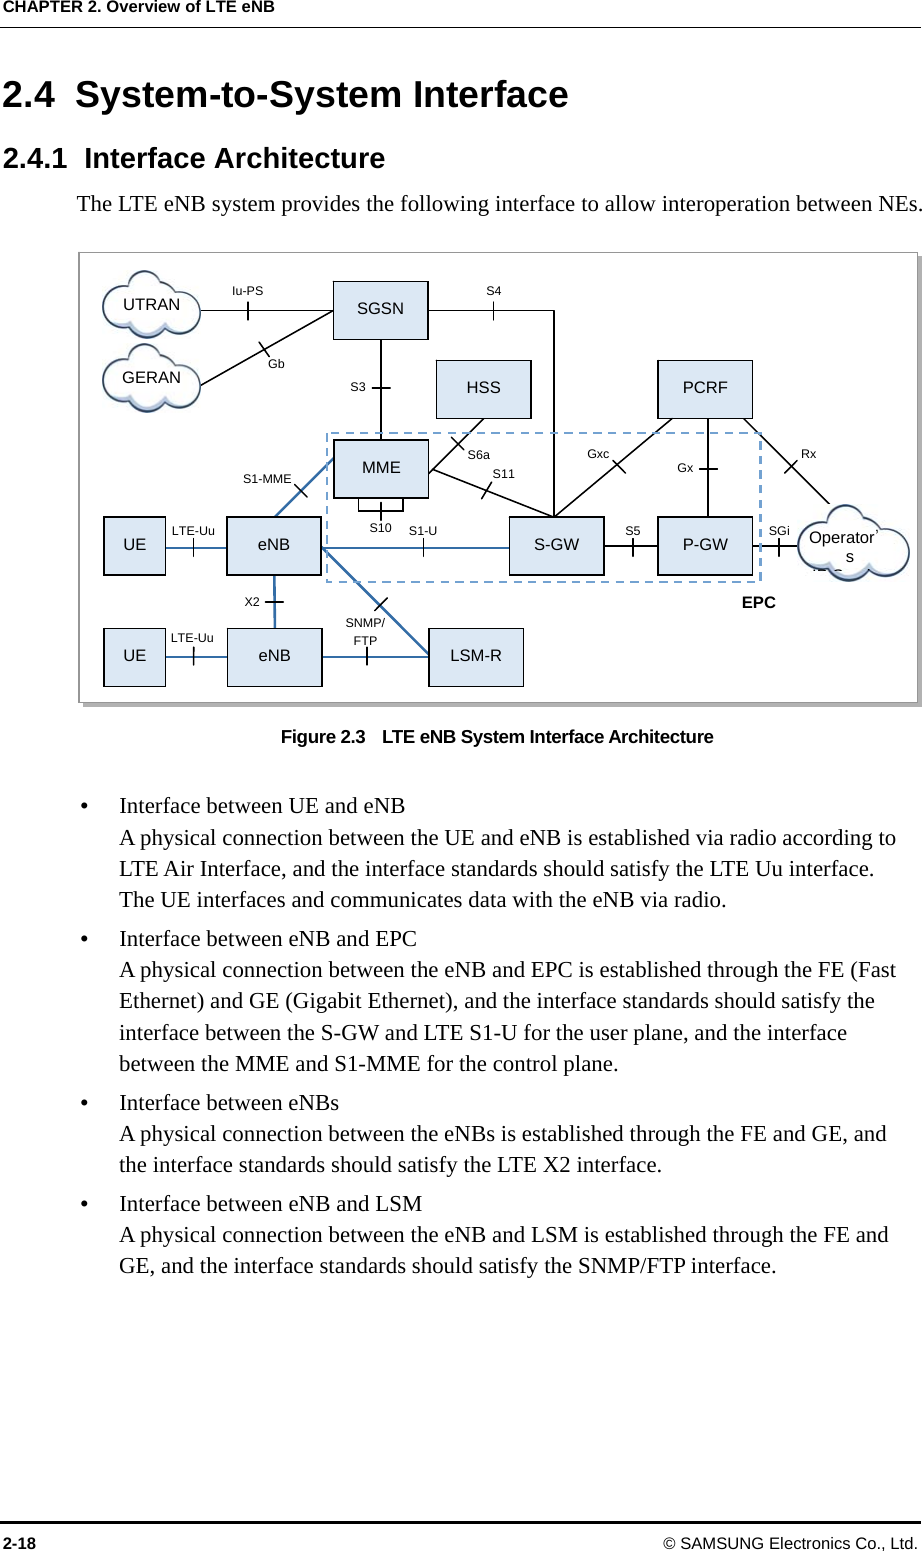 CHAPTER 2. Overview of LTE eNB 2-18 © SAMSUNG Electronics Co., Ltd. SGSN HSS eNB eNB  LSM-R S-GW  P-GW PCRF UTRAN GERAN UE UE MME Iu-PS S4 LTE-Uu S1-U S5 SGi S10 SNMP/ FTP LTE-Uu S3 S1-MME  S11 S6a  Gxc Rx Gx Gb X2 Operator’s IP S iEPC 2.4 System-to-System Interface 2.4.1 Interface Architecture The LTE eNB system provides the following interface to allow interoperation between NEs.  Figure 2.3    LTE eNB System Interface Architecture   Interface between UE and eNB A physical connection between the UE and eNB is established via radio according to LTE Air Interface, and the interface standards should satisfy the LTE Uu interface.   The UE interfaces and communicates data with the eNB via radio.  Interface between eNB and EPC A physical connection between the eNB and EPC is established through the FE (Fast Ethernet) and GE (Gigabit Ethernet), and the interface standards should satisfy the interface between the S-GW and LTE S1-U for the user plane, and the interface between the MME and S1-MME for the control plane.  Interface between eNBs A physical connection between the eNBs is established through the FE and GE, and the interface standards should satisfy the LTE X2 interface.  Interface between eNB and LSM A physical connection between the eNB and LSM is established through the FE and GE, and the interface standards should satisfy the SNMP/FTP interface.  